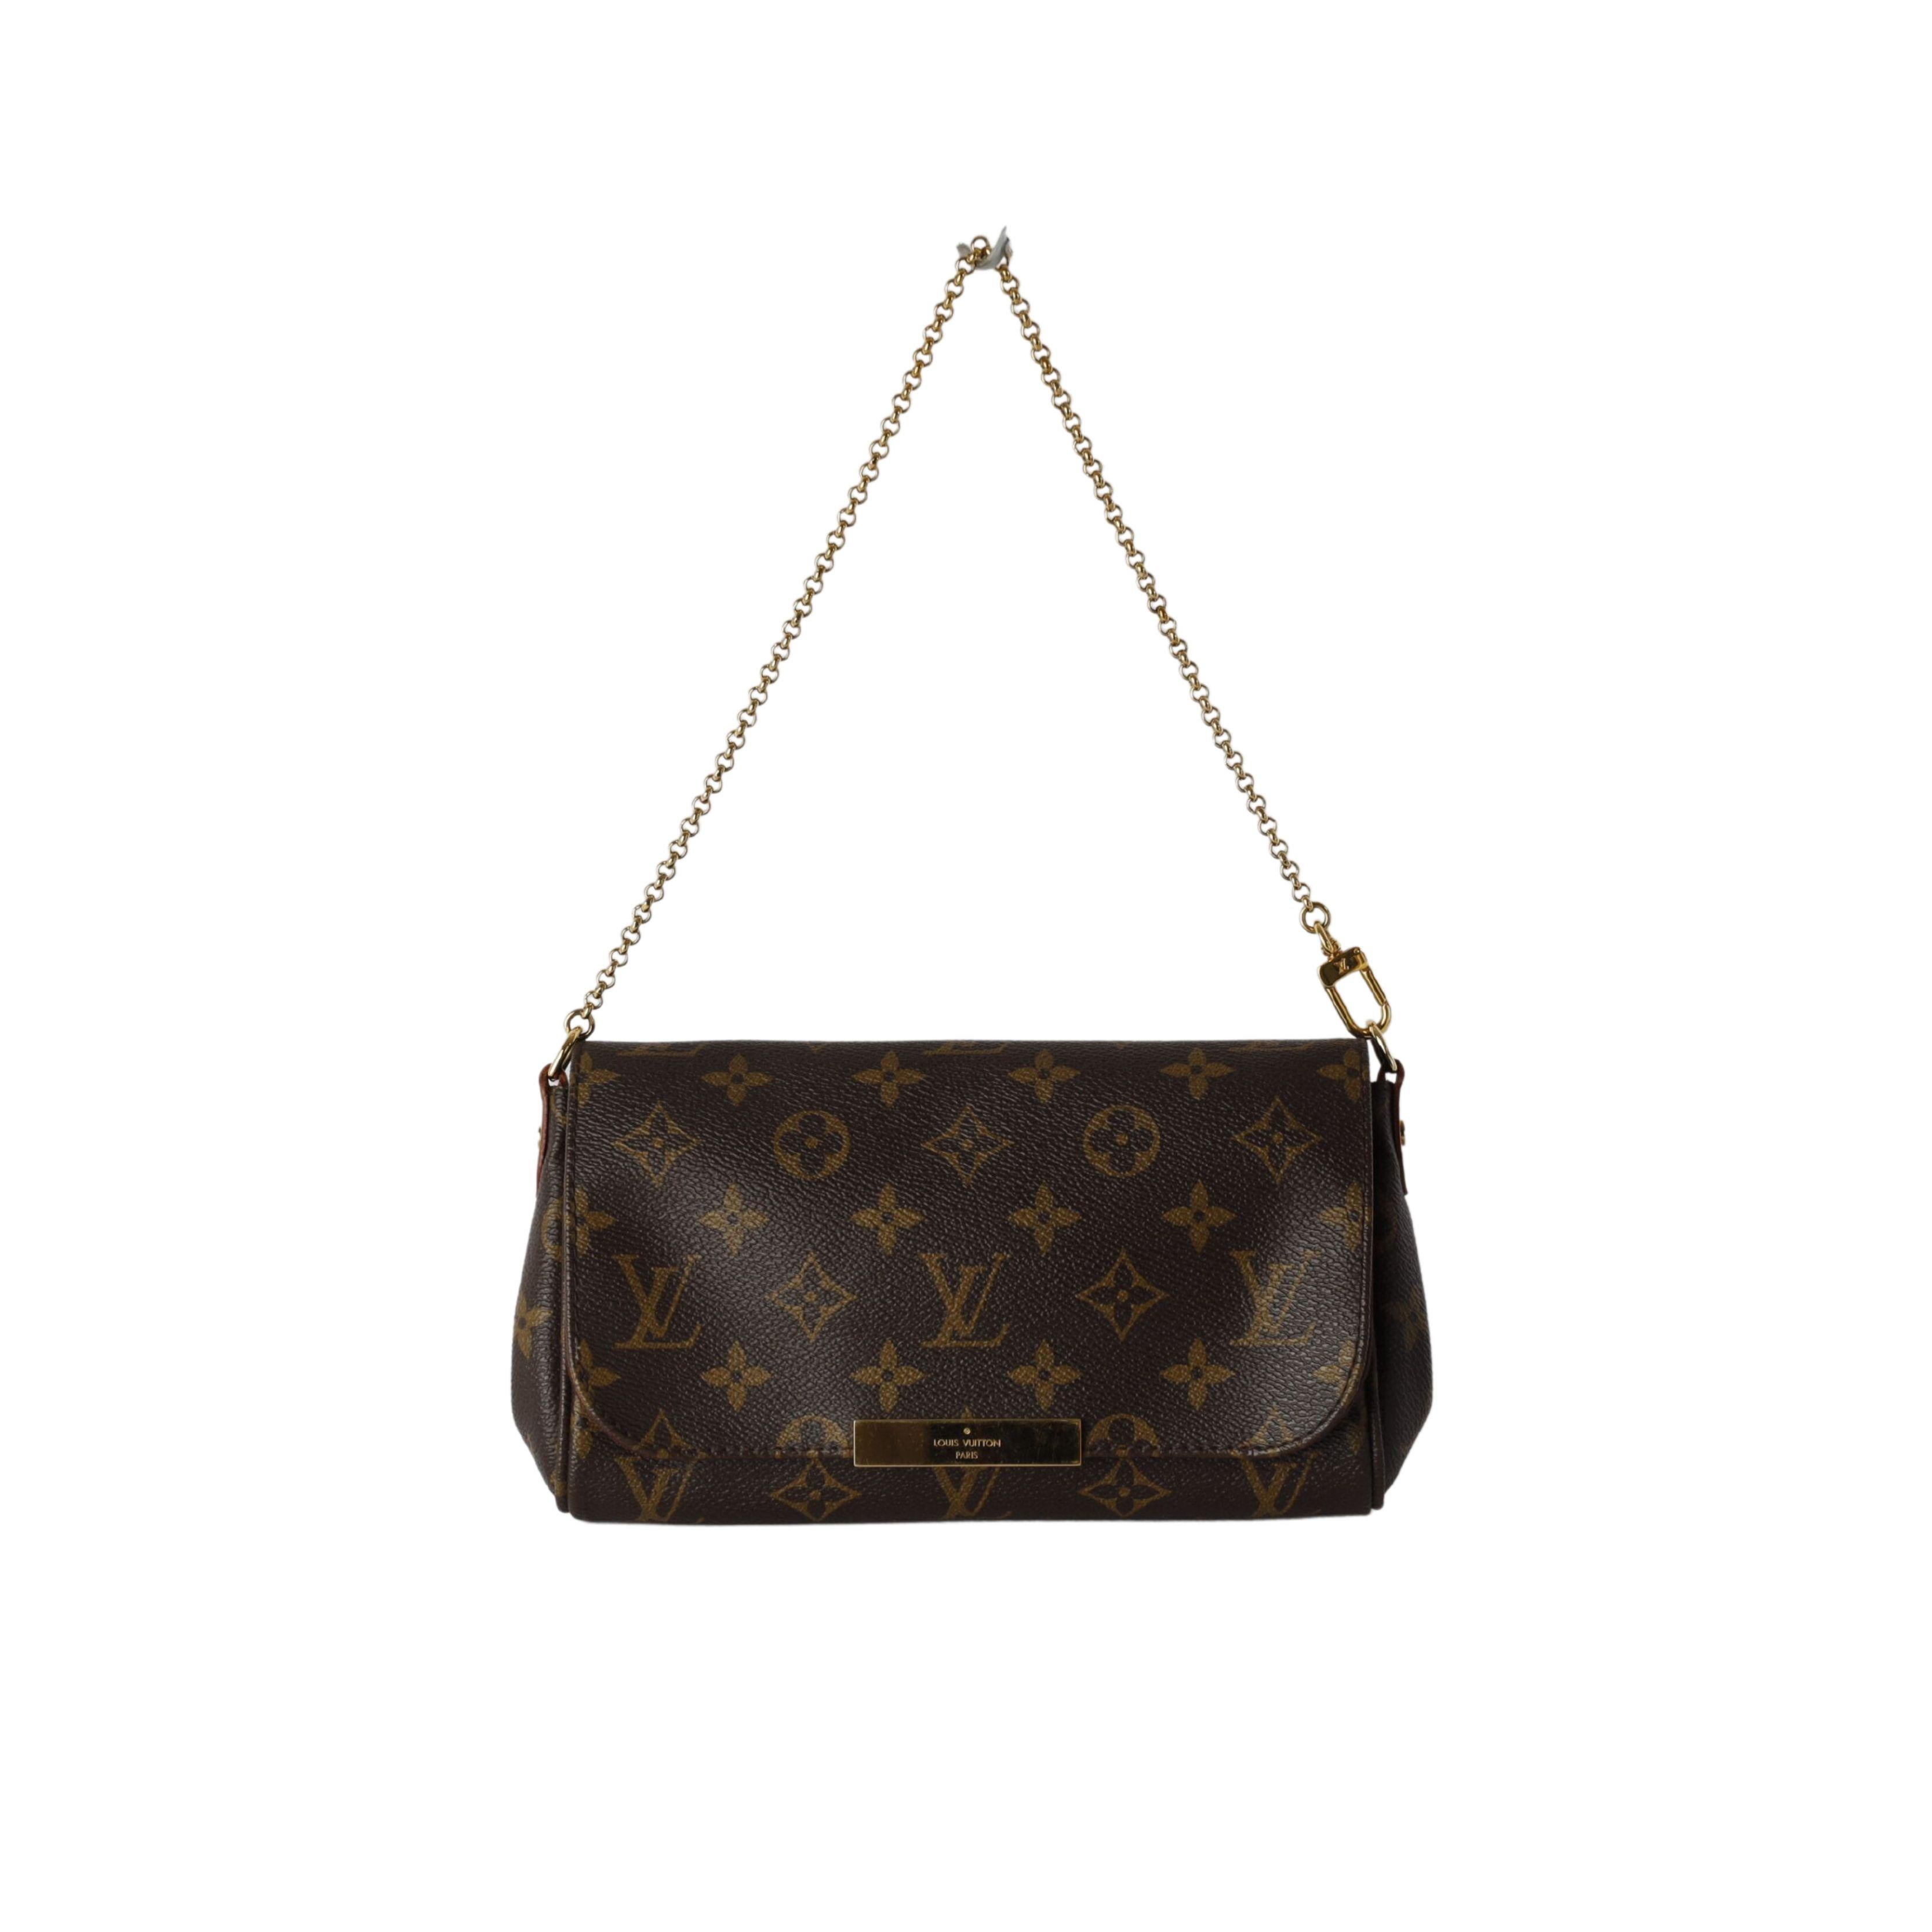 The Favorite PM shoulder bag is aptly named due to its versatility. It has a flap closure, with a small magnetic Louis Vuitton gold-tone plaque. The interior lining is made of canvas fabric and has an internal slip pocket with logo engraved in